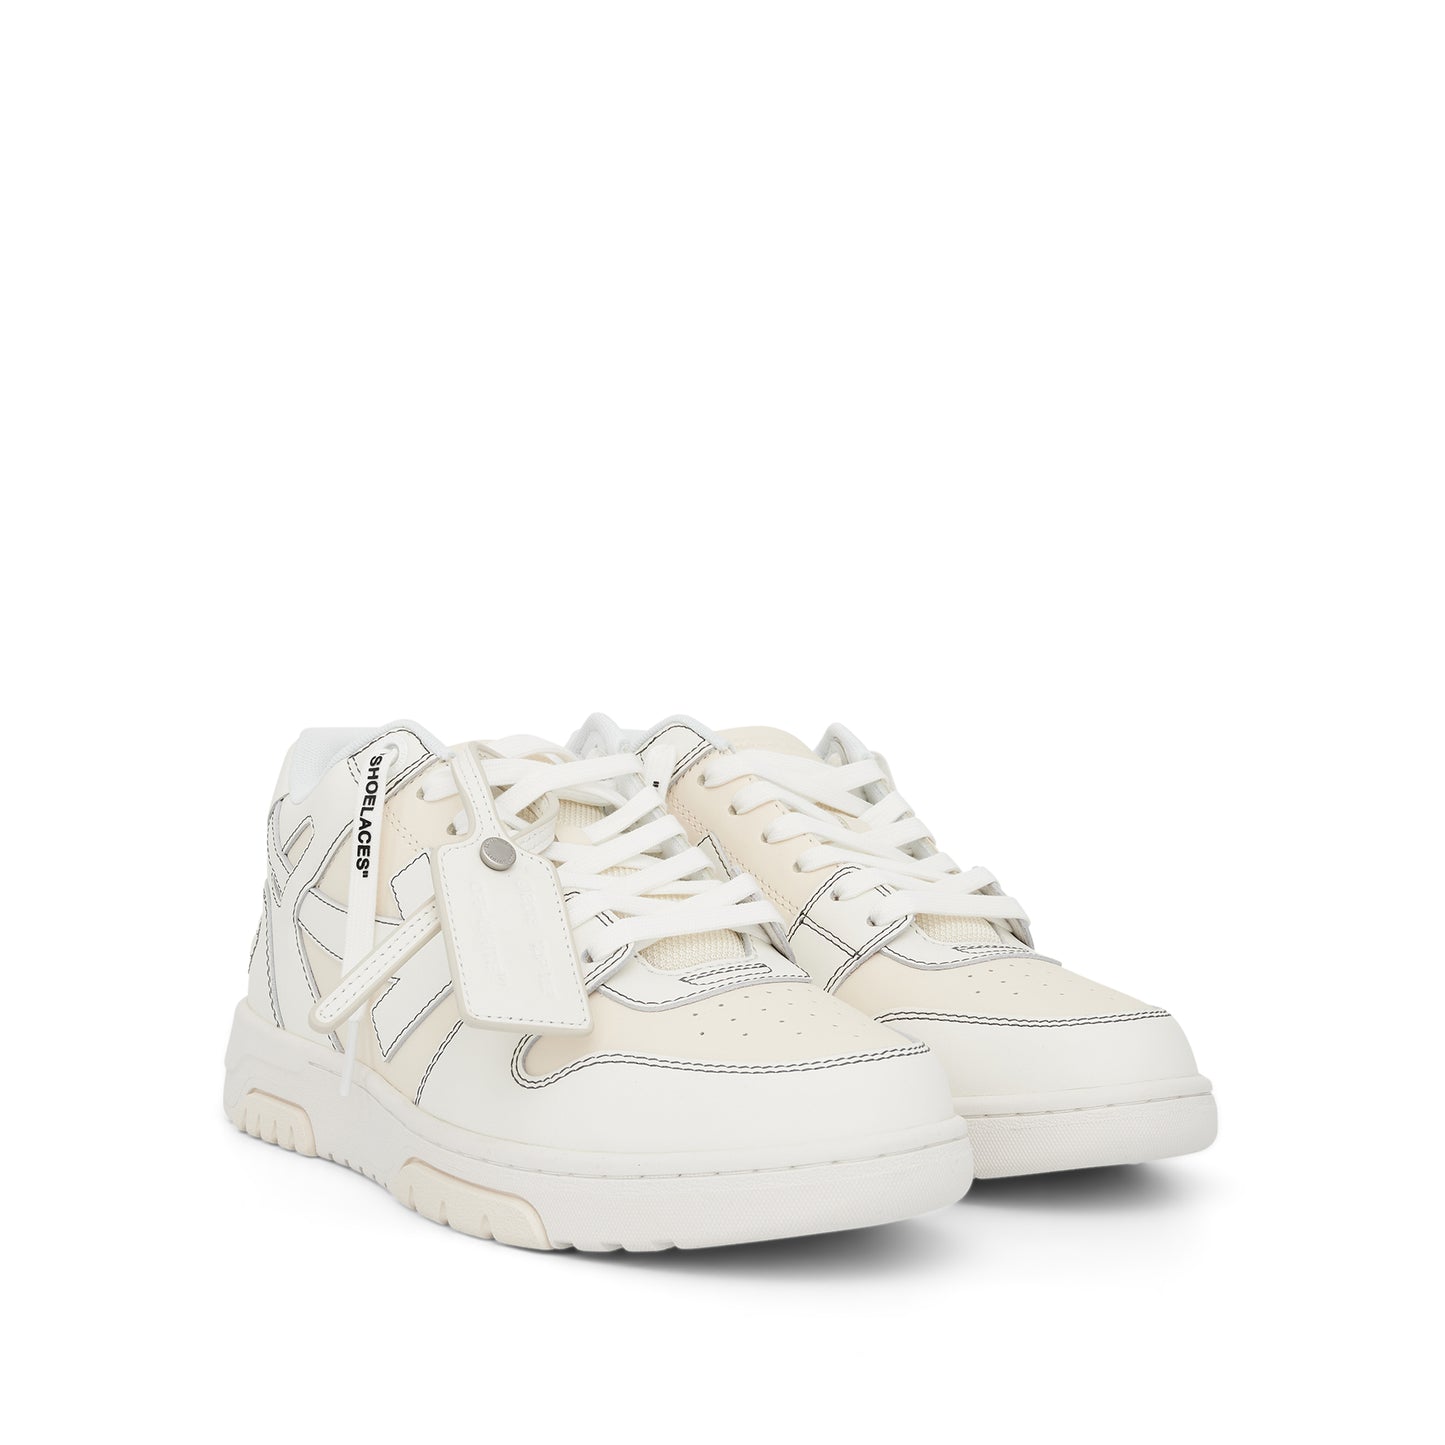 Out of Office Calf Leather Sneaker in Cream/White